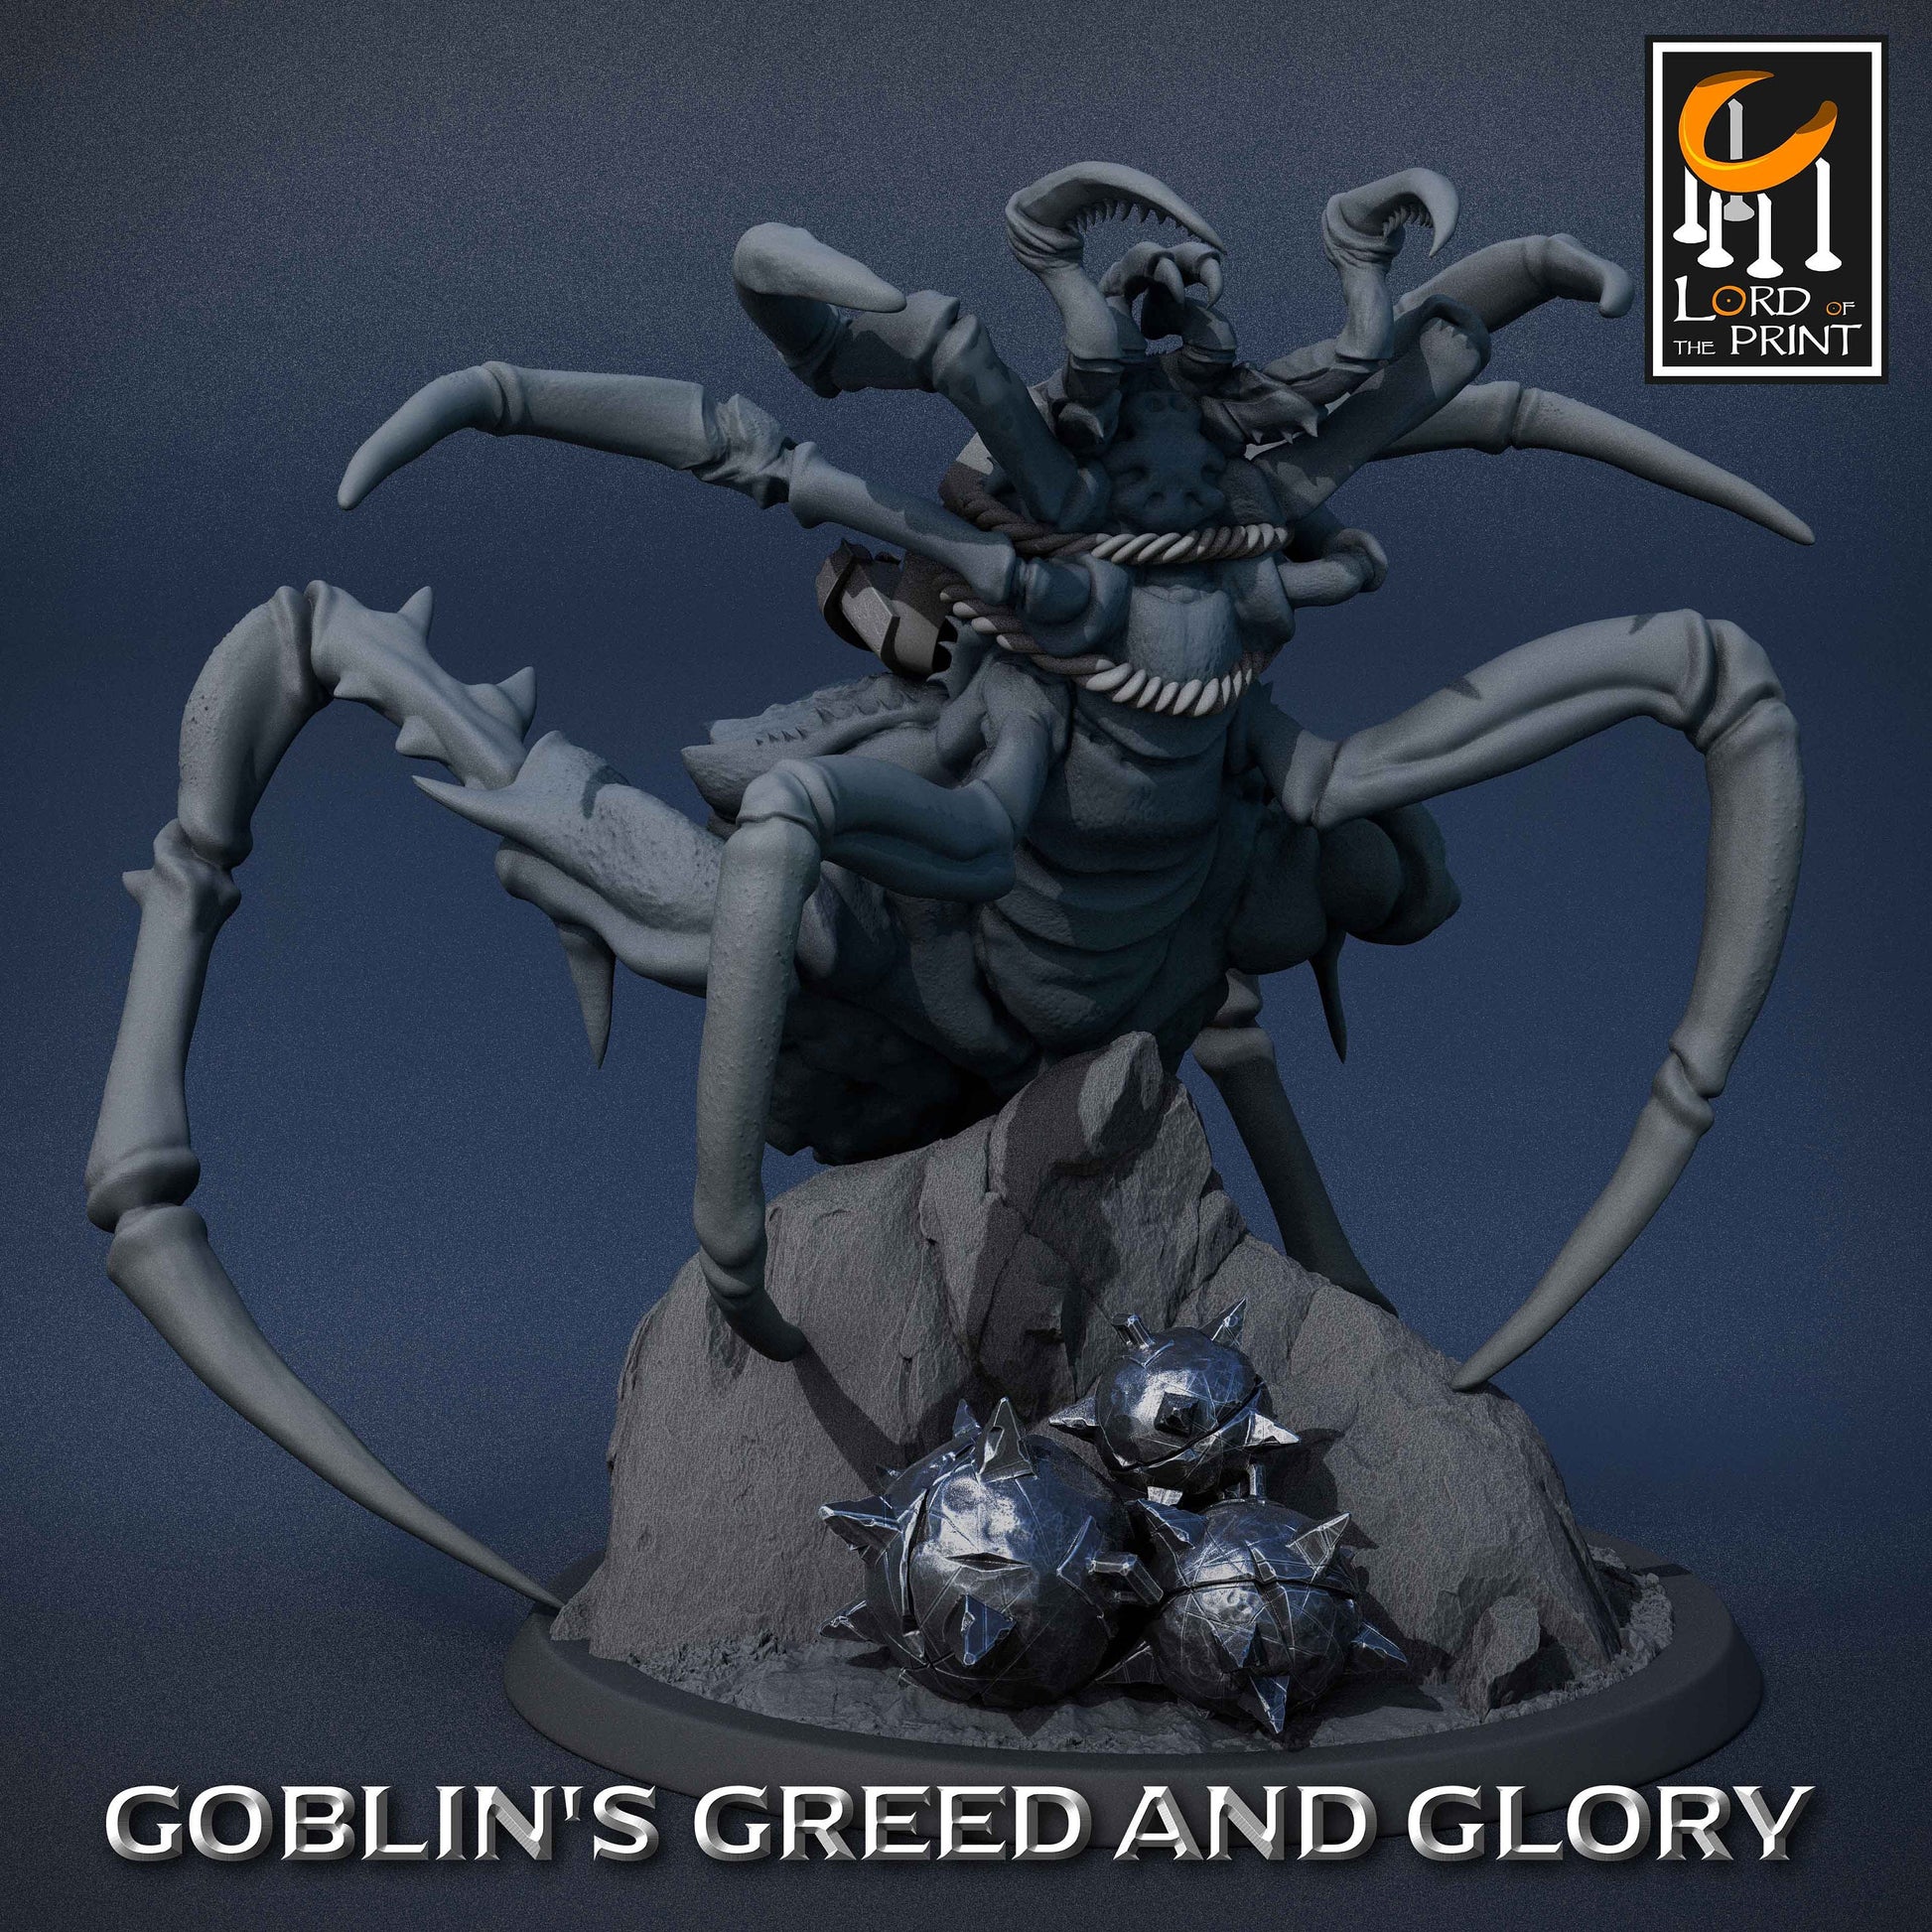 Goblin Spider Mounts (Set 1) by Lord of the Print | Please Read Description